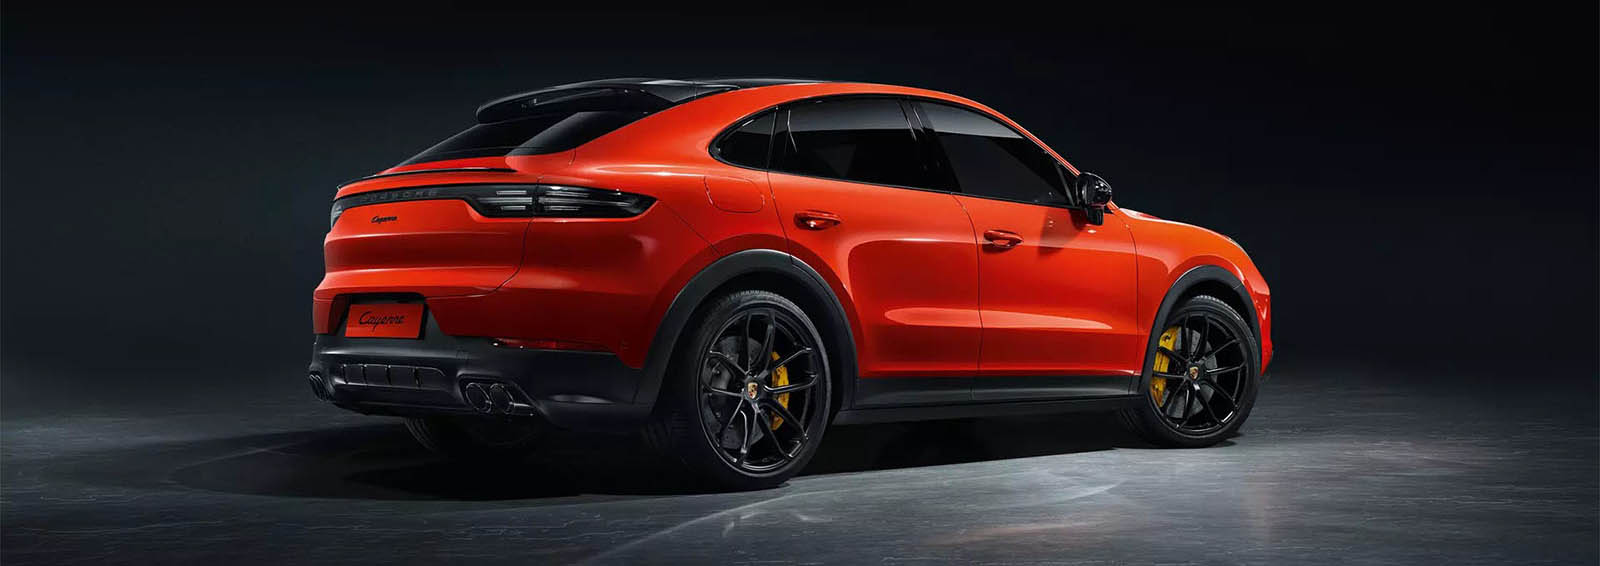 2020 Porsche Cayenne Coupe Appearance Main Img